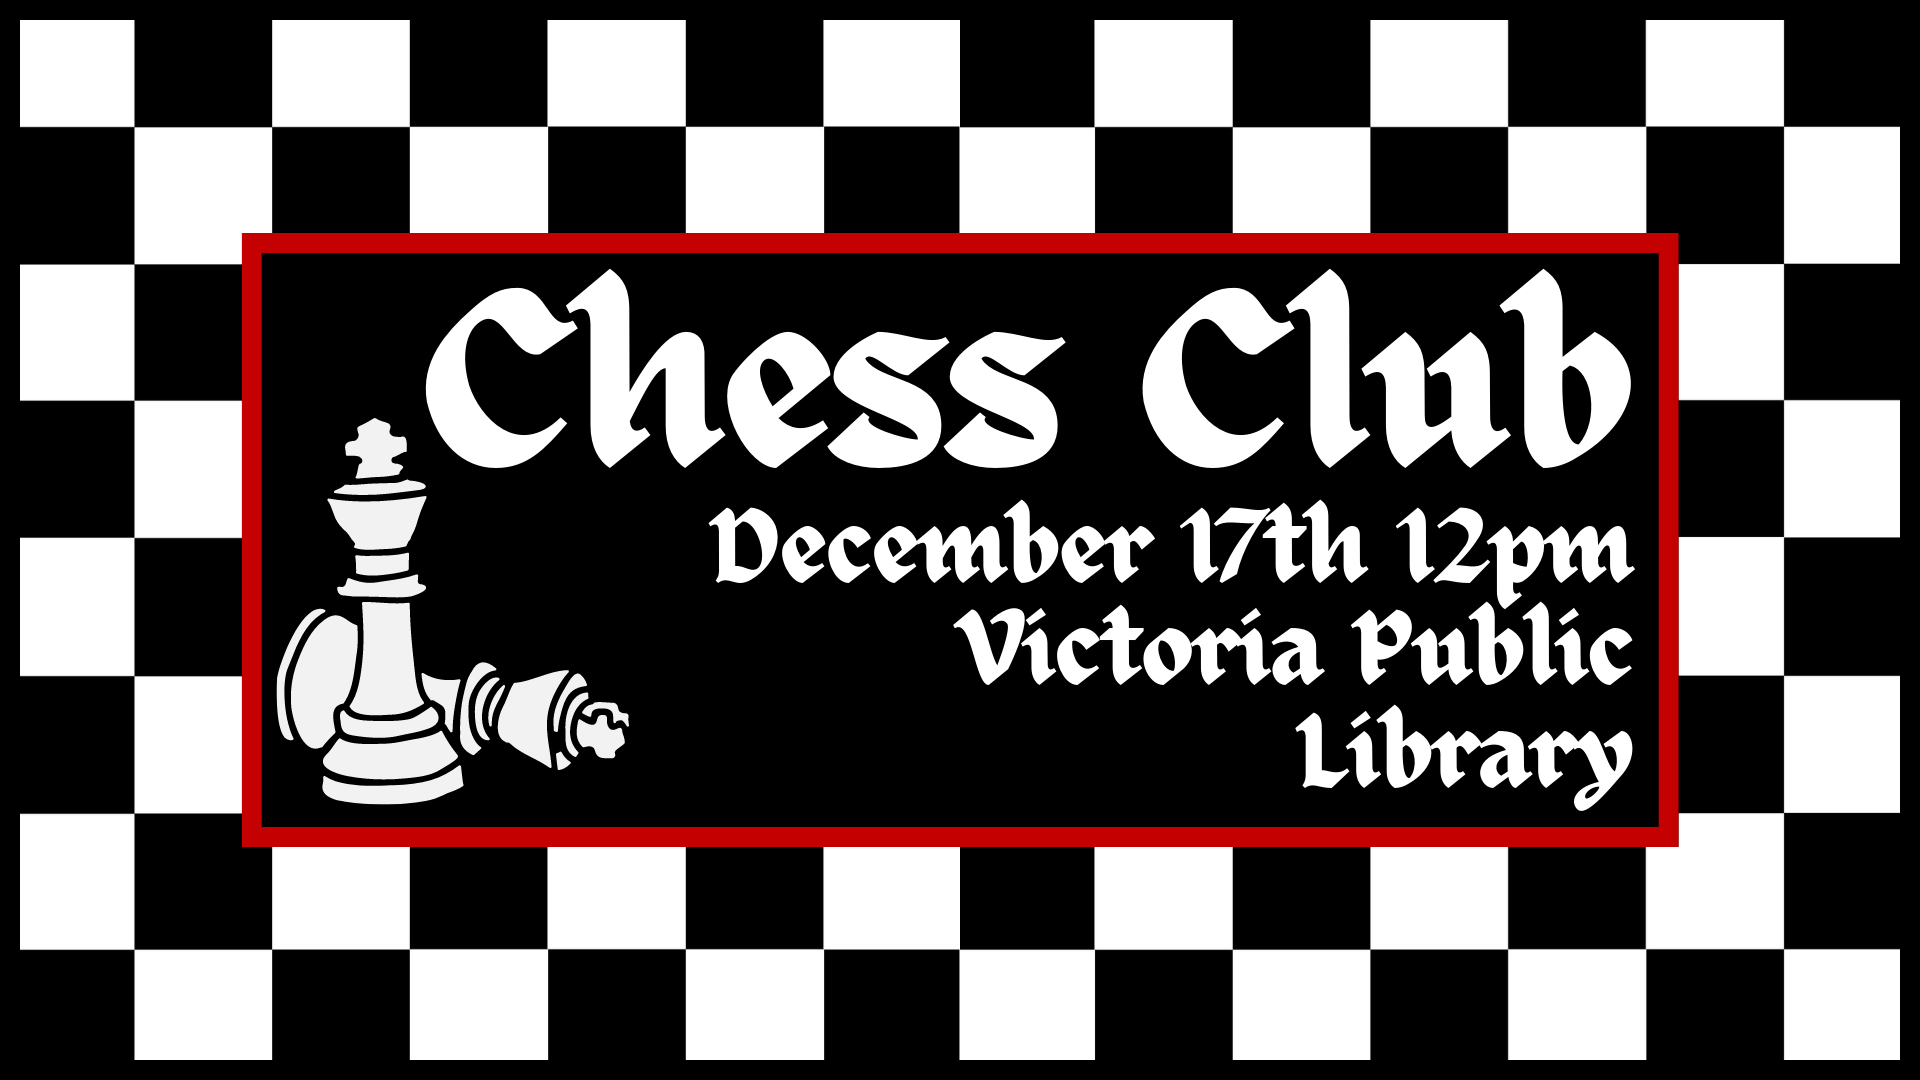 Chess Club, December 17th at 12pm